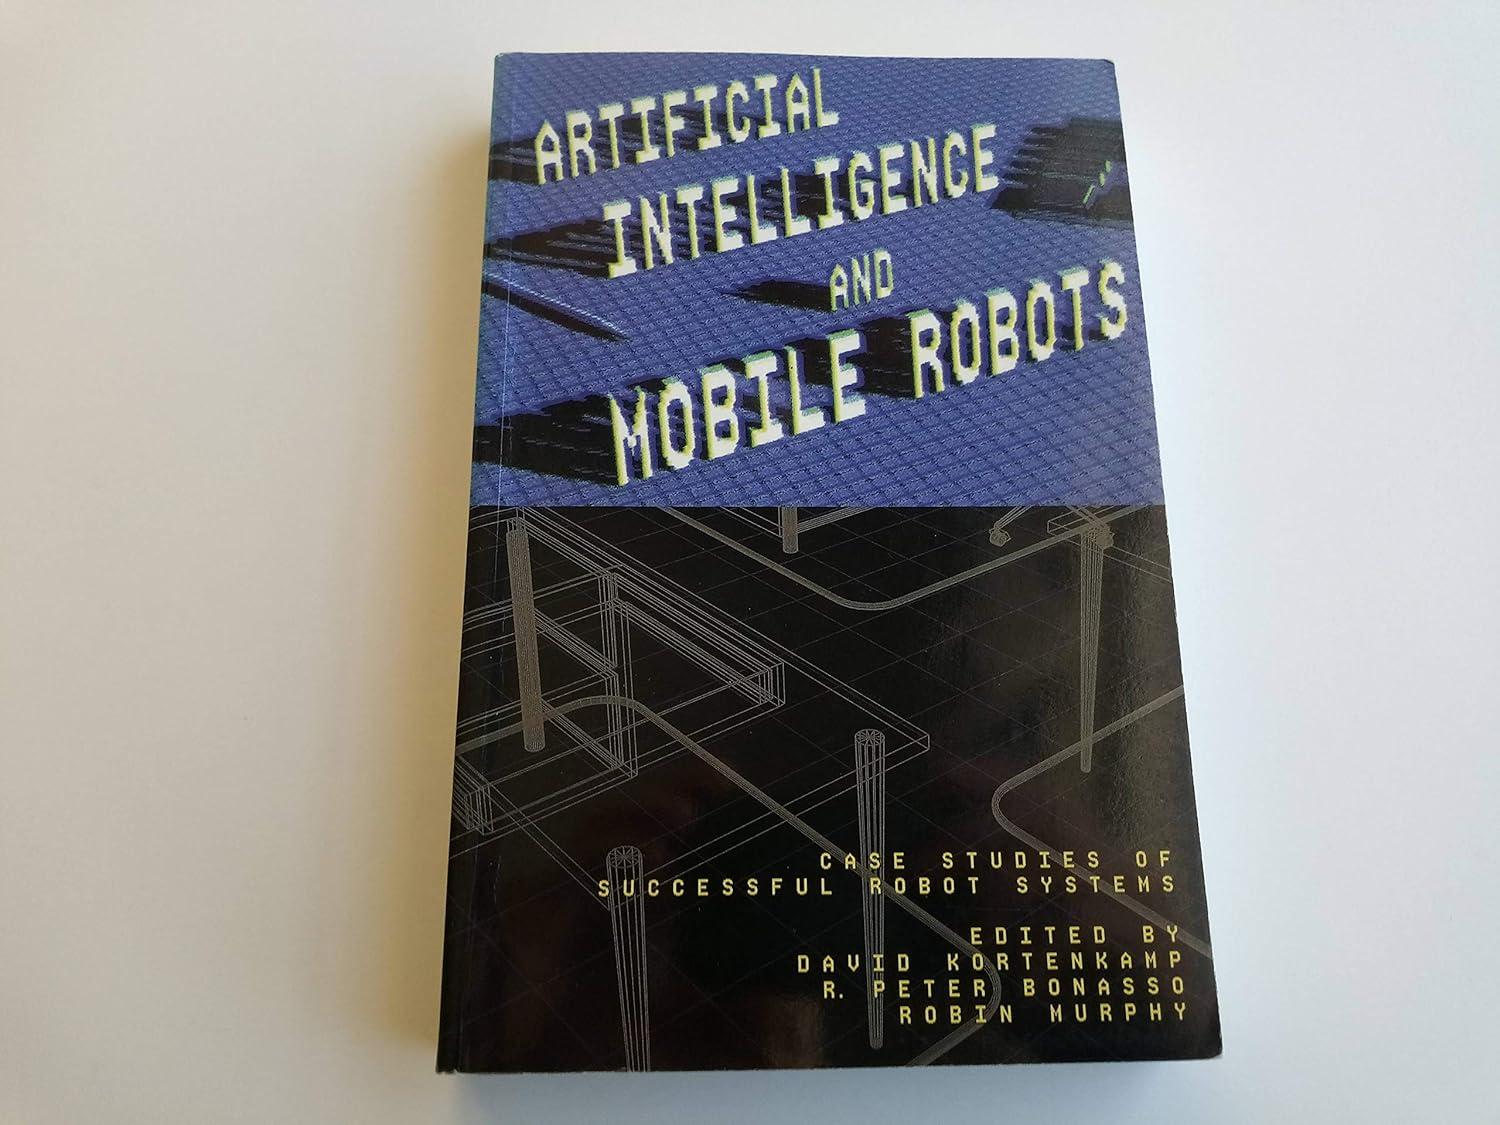 artificial intelligence and mobile robots case studies of successful robot systems 1st edition david